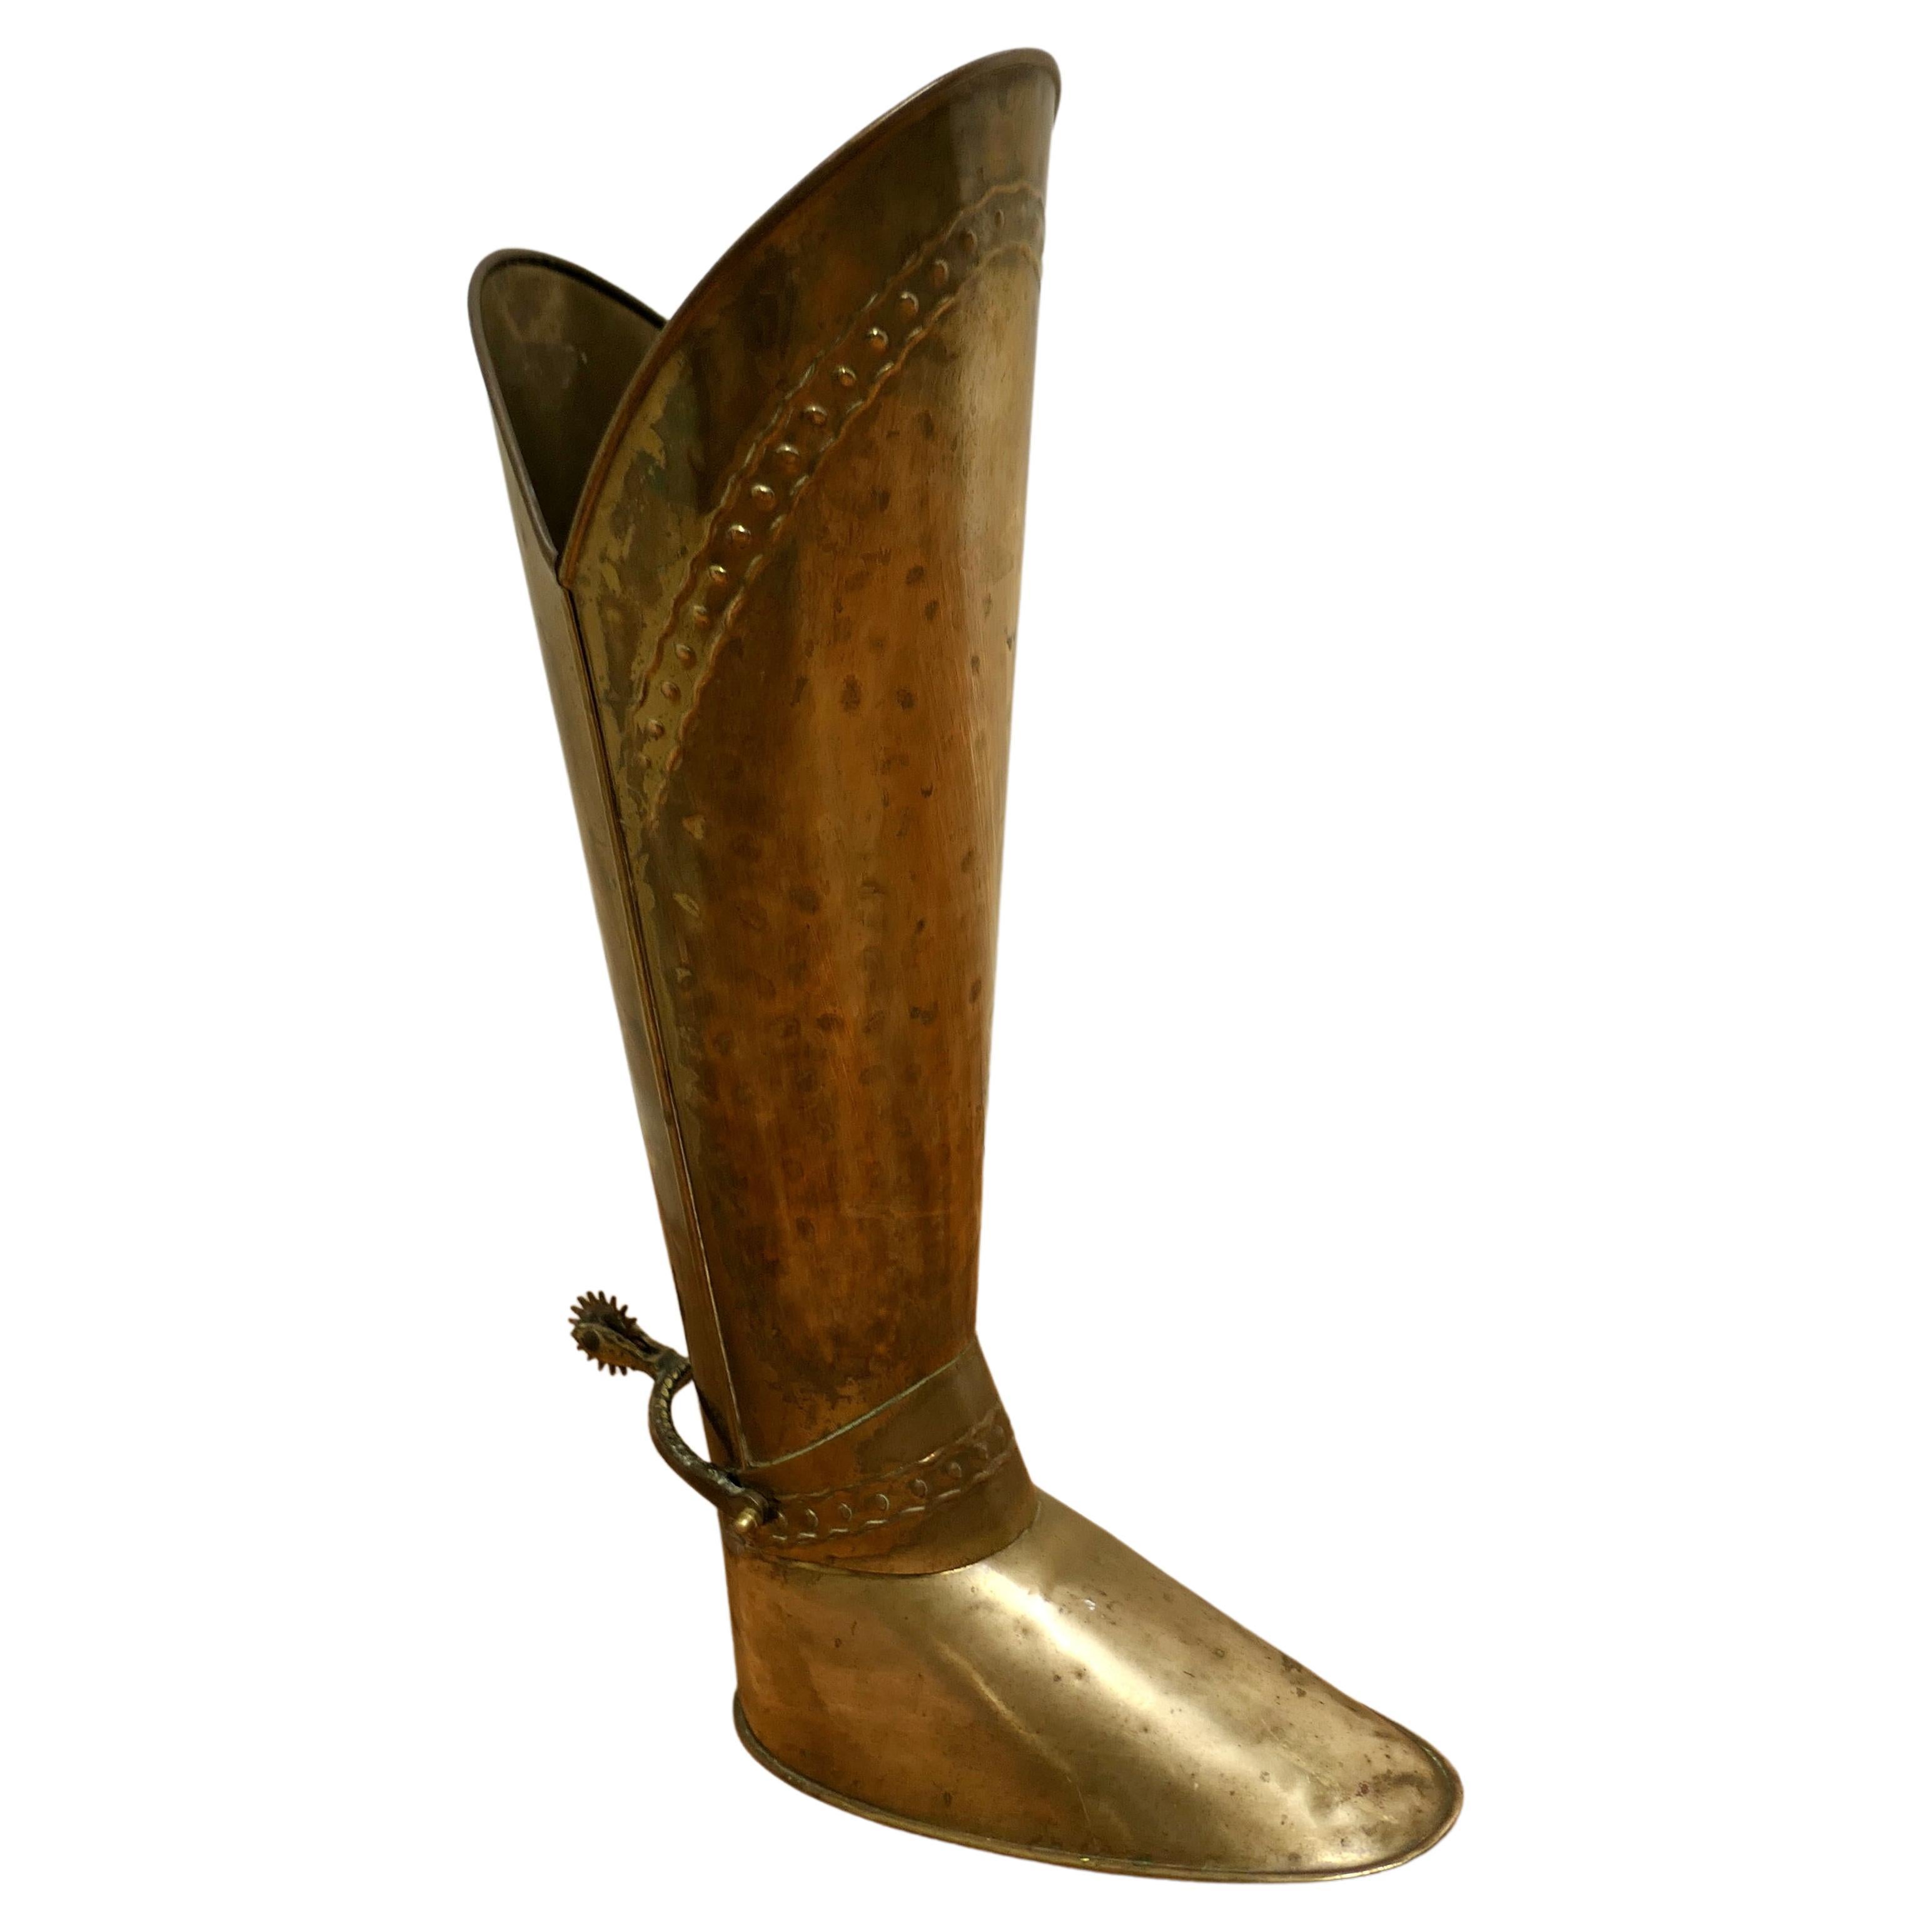 Unusual Stick Stand in the Form of a Brass Boot For Sale